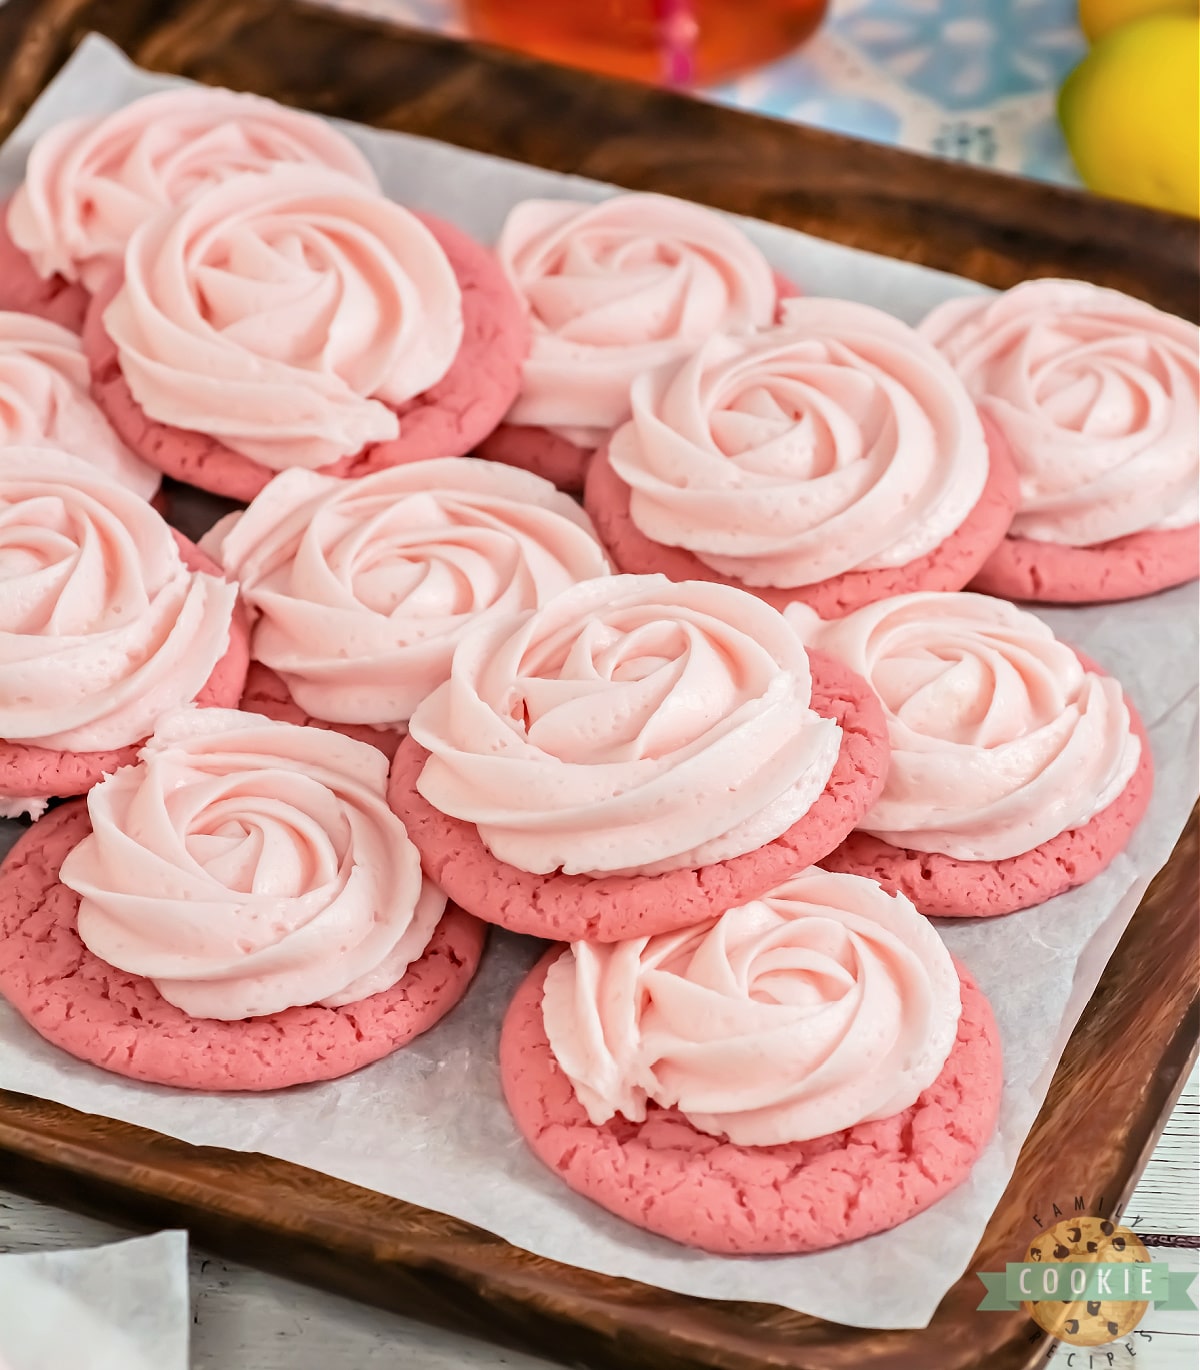 Pink Lemonade Cookies are soft, chewy, and packed with lemon flavor. Topped with a simple lemon frosting, these pink lemonade cookies are pretty, refreshing, and delicious. 